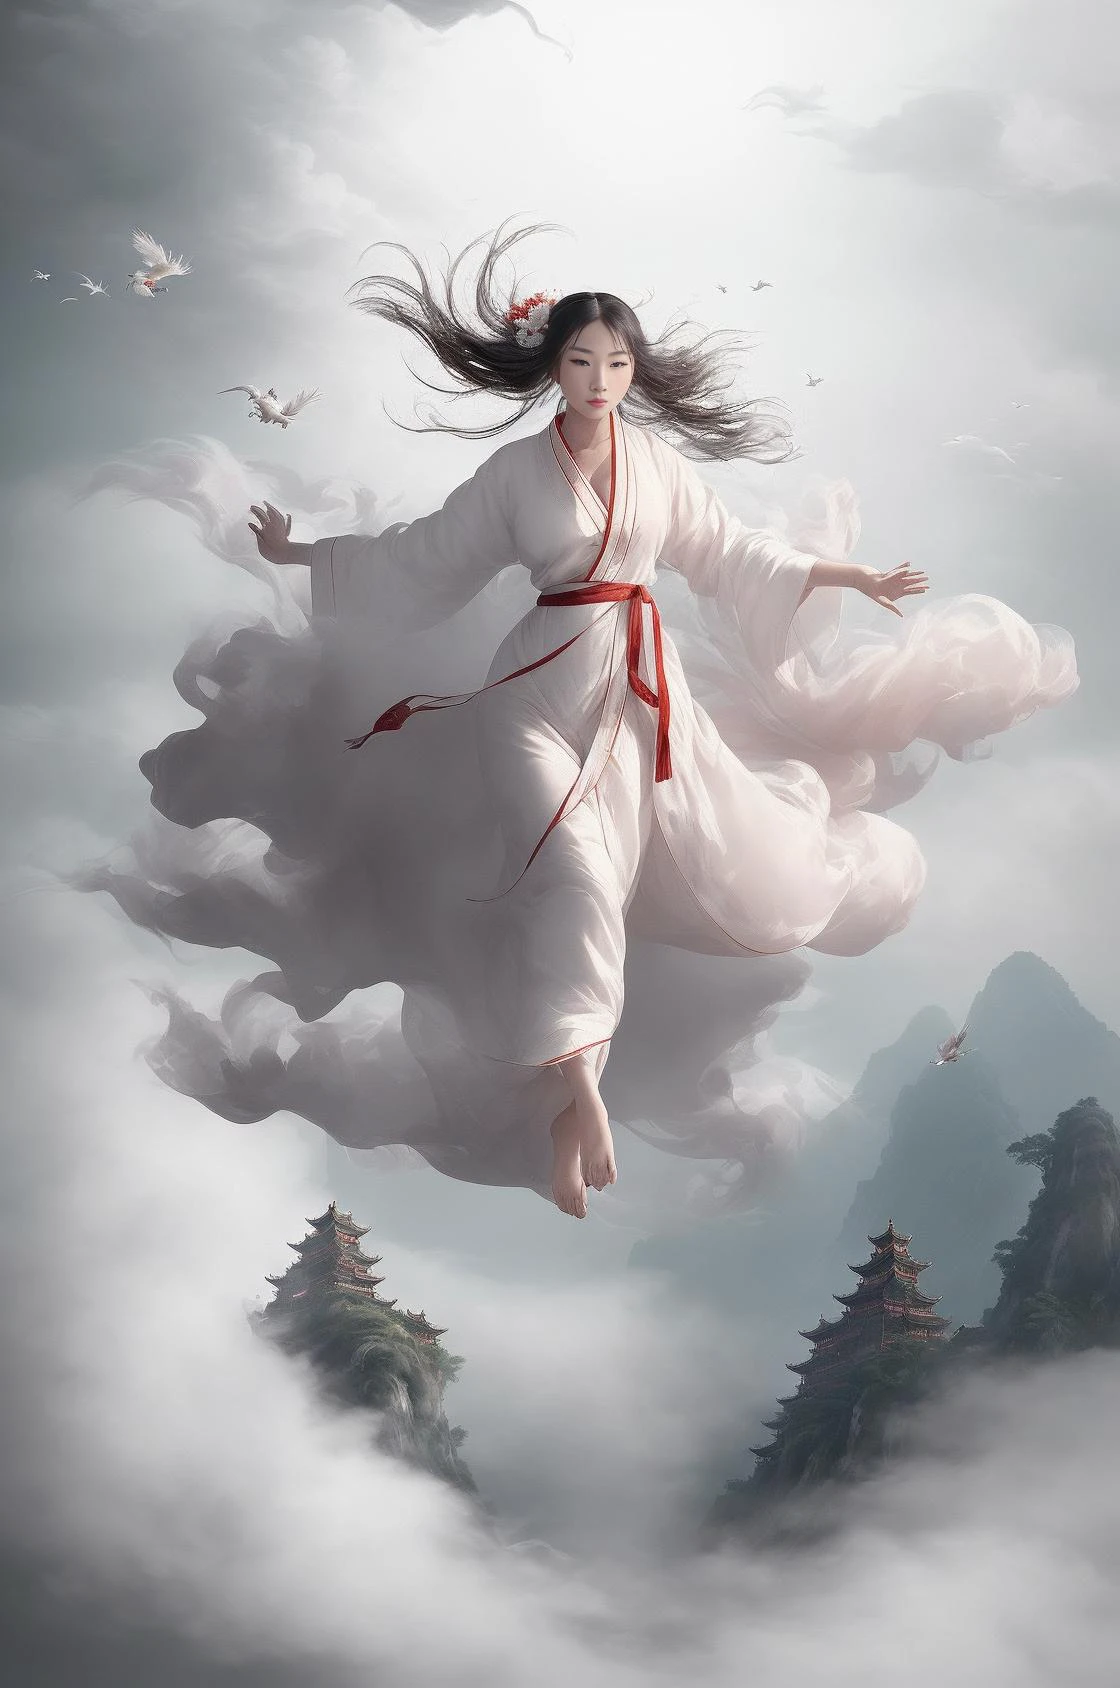 1 girl,(white Chinese robe),
In a captivating scene, a beautiful woman adorned in a flowing white Chinese robe soars through the misty clouds on the back of a majestic Chinese phoenix. The wind gently lifts her robe, accentuating the sense of flight as they gracefully navigate the ethereal cloudscape.